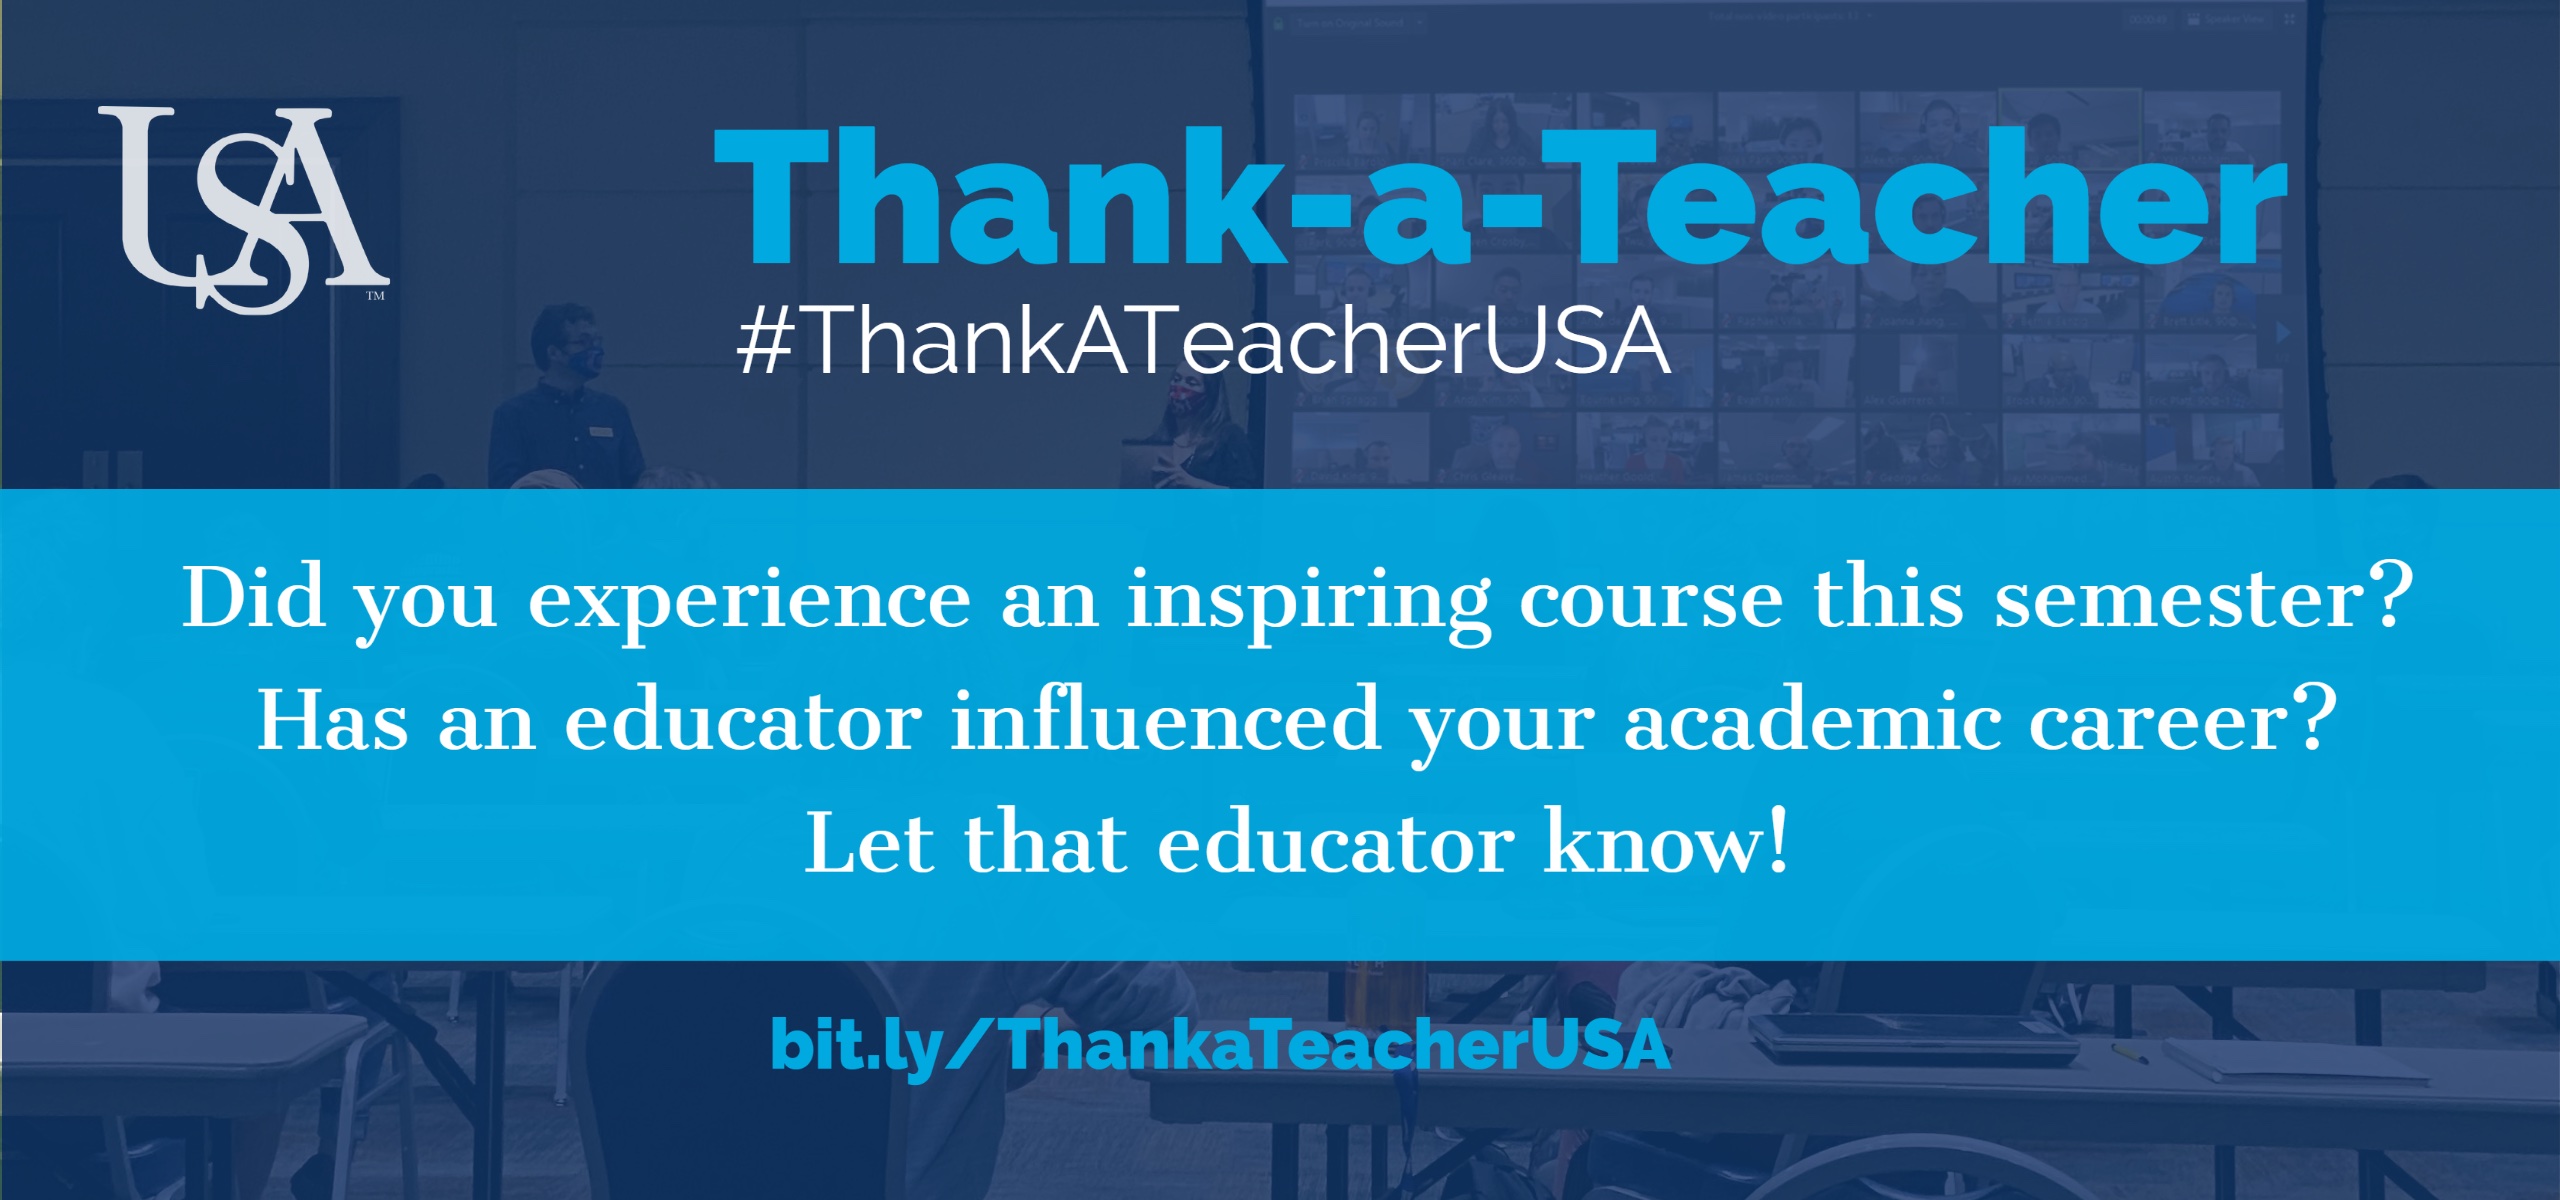 Thank-a-Teacher Did you experience an inspiring course this semester? Has an educator influenced your academic career? Let them know! bit.ly/ThankaTeacherUSA